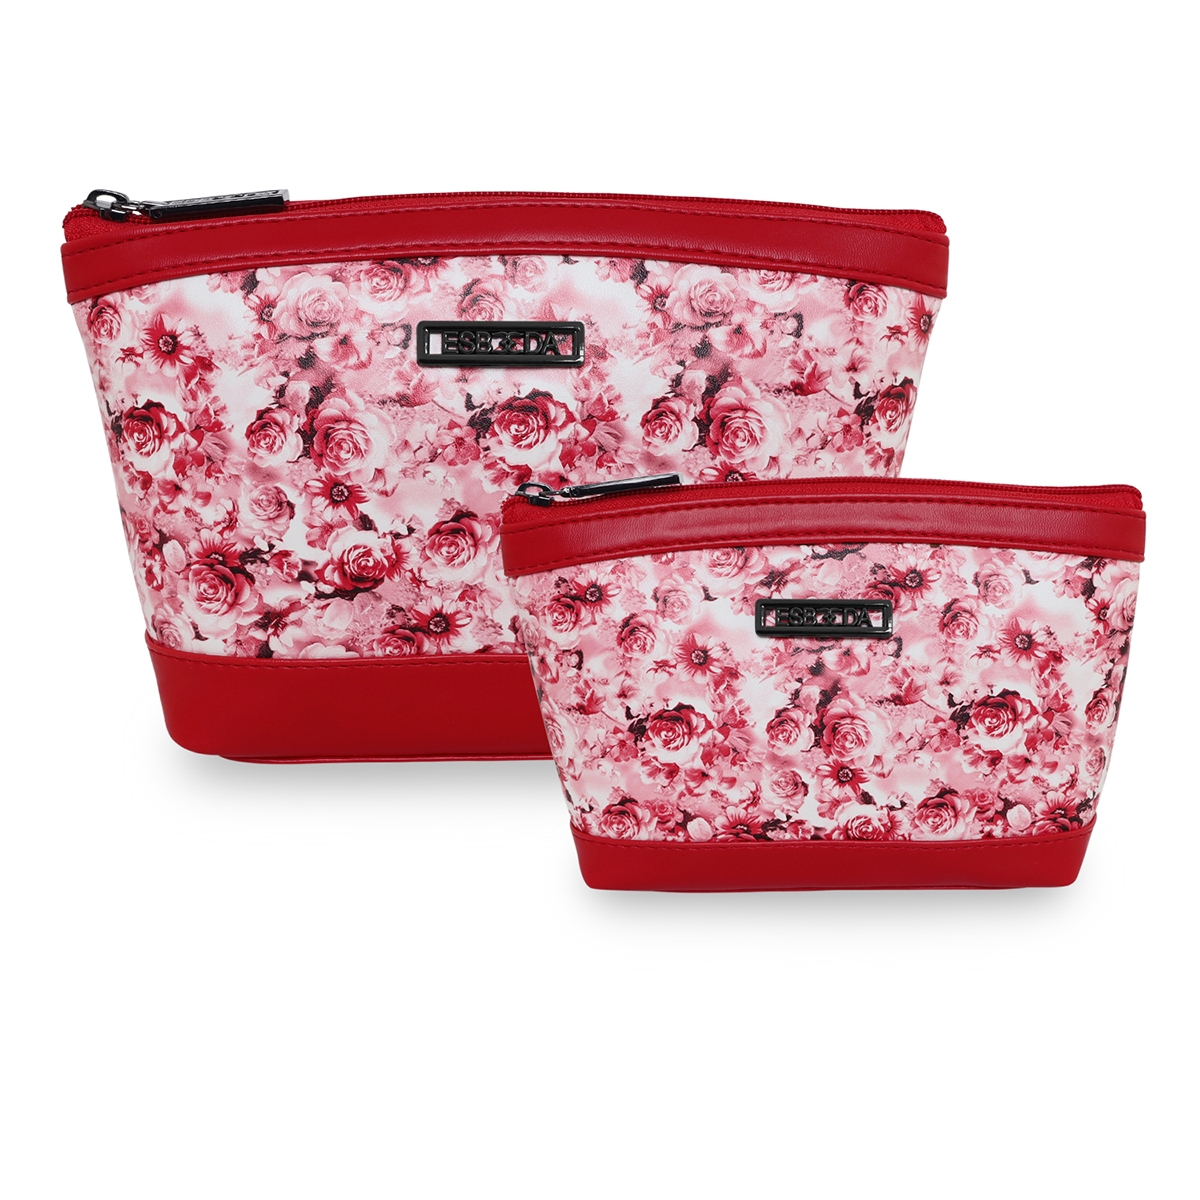 ESBEDA | ESBEDA Red Color Floral Print Pouch For Women Pack of 2